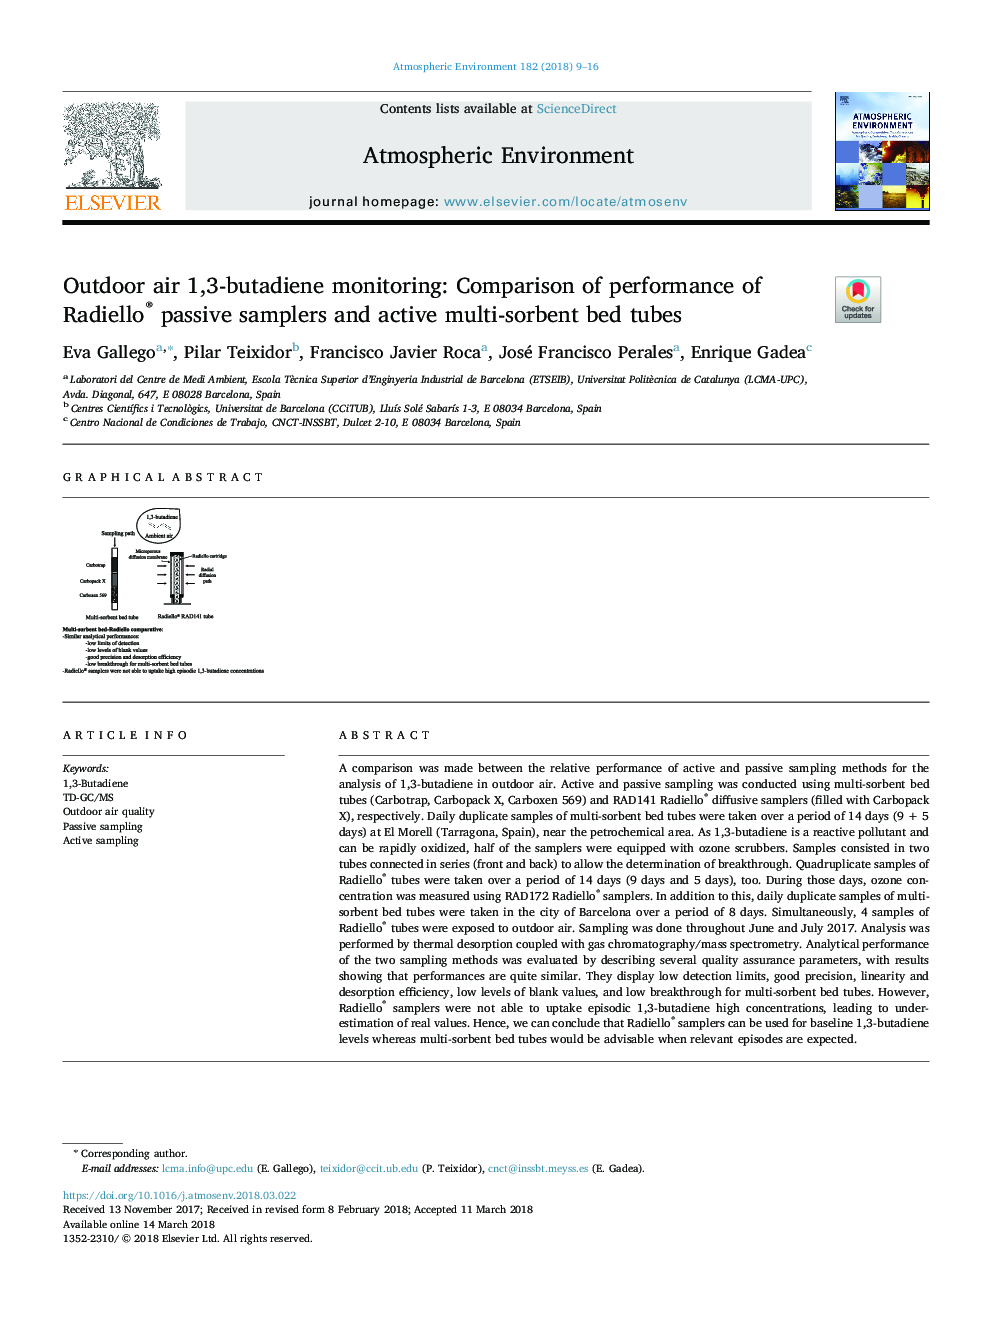 Outdoor air 1,3-butadiene monitoring: Comparison of performance of Radiello® passive samplers and active multi-sorbent bed tubes